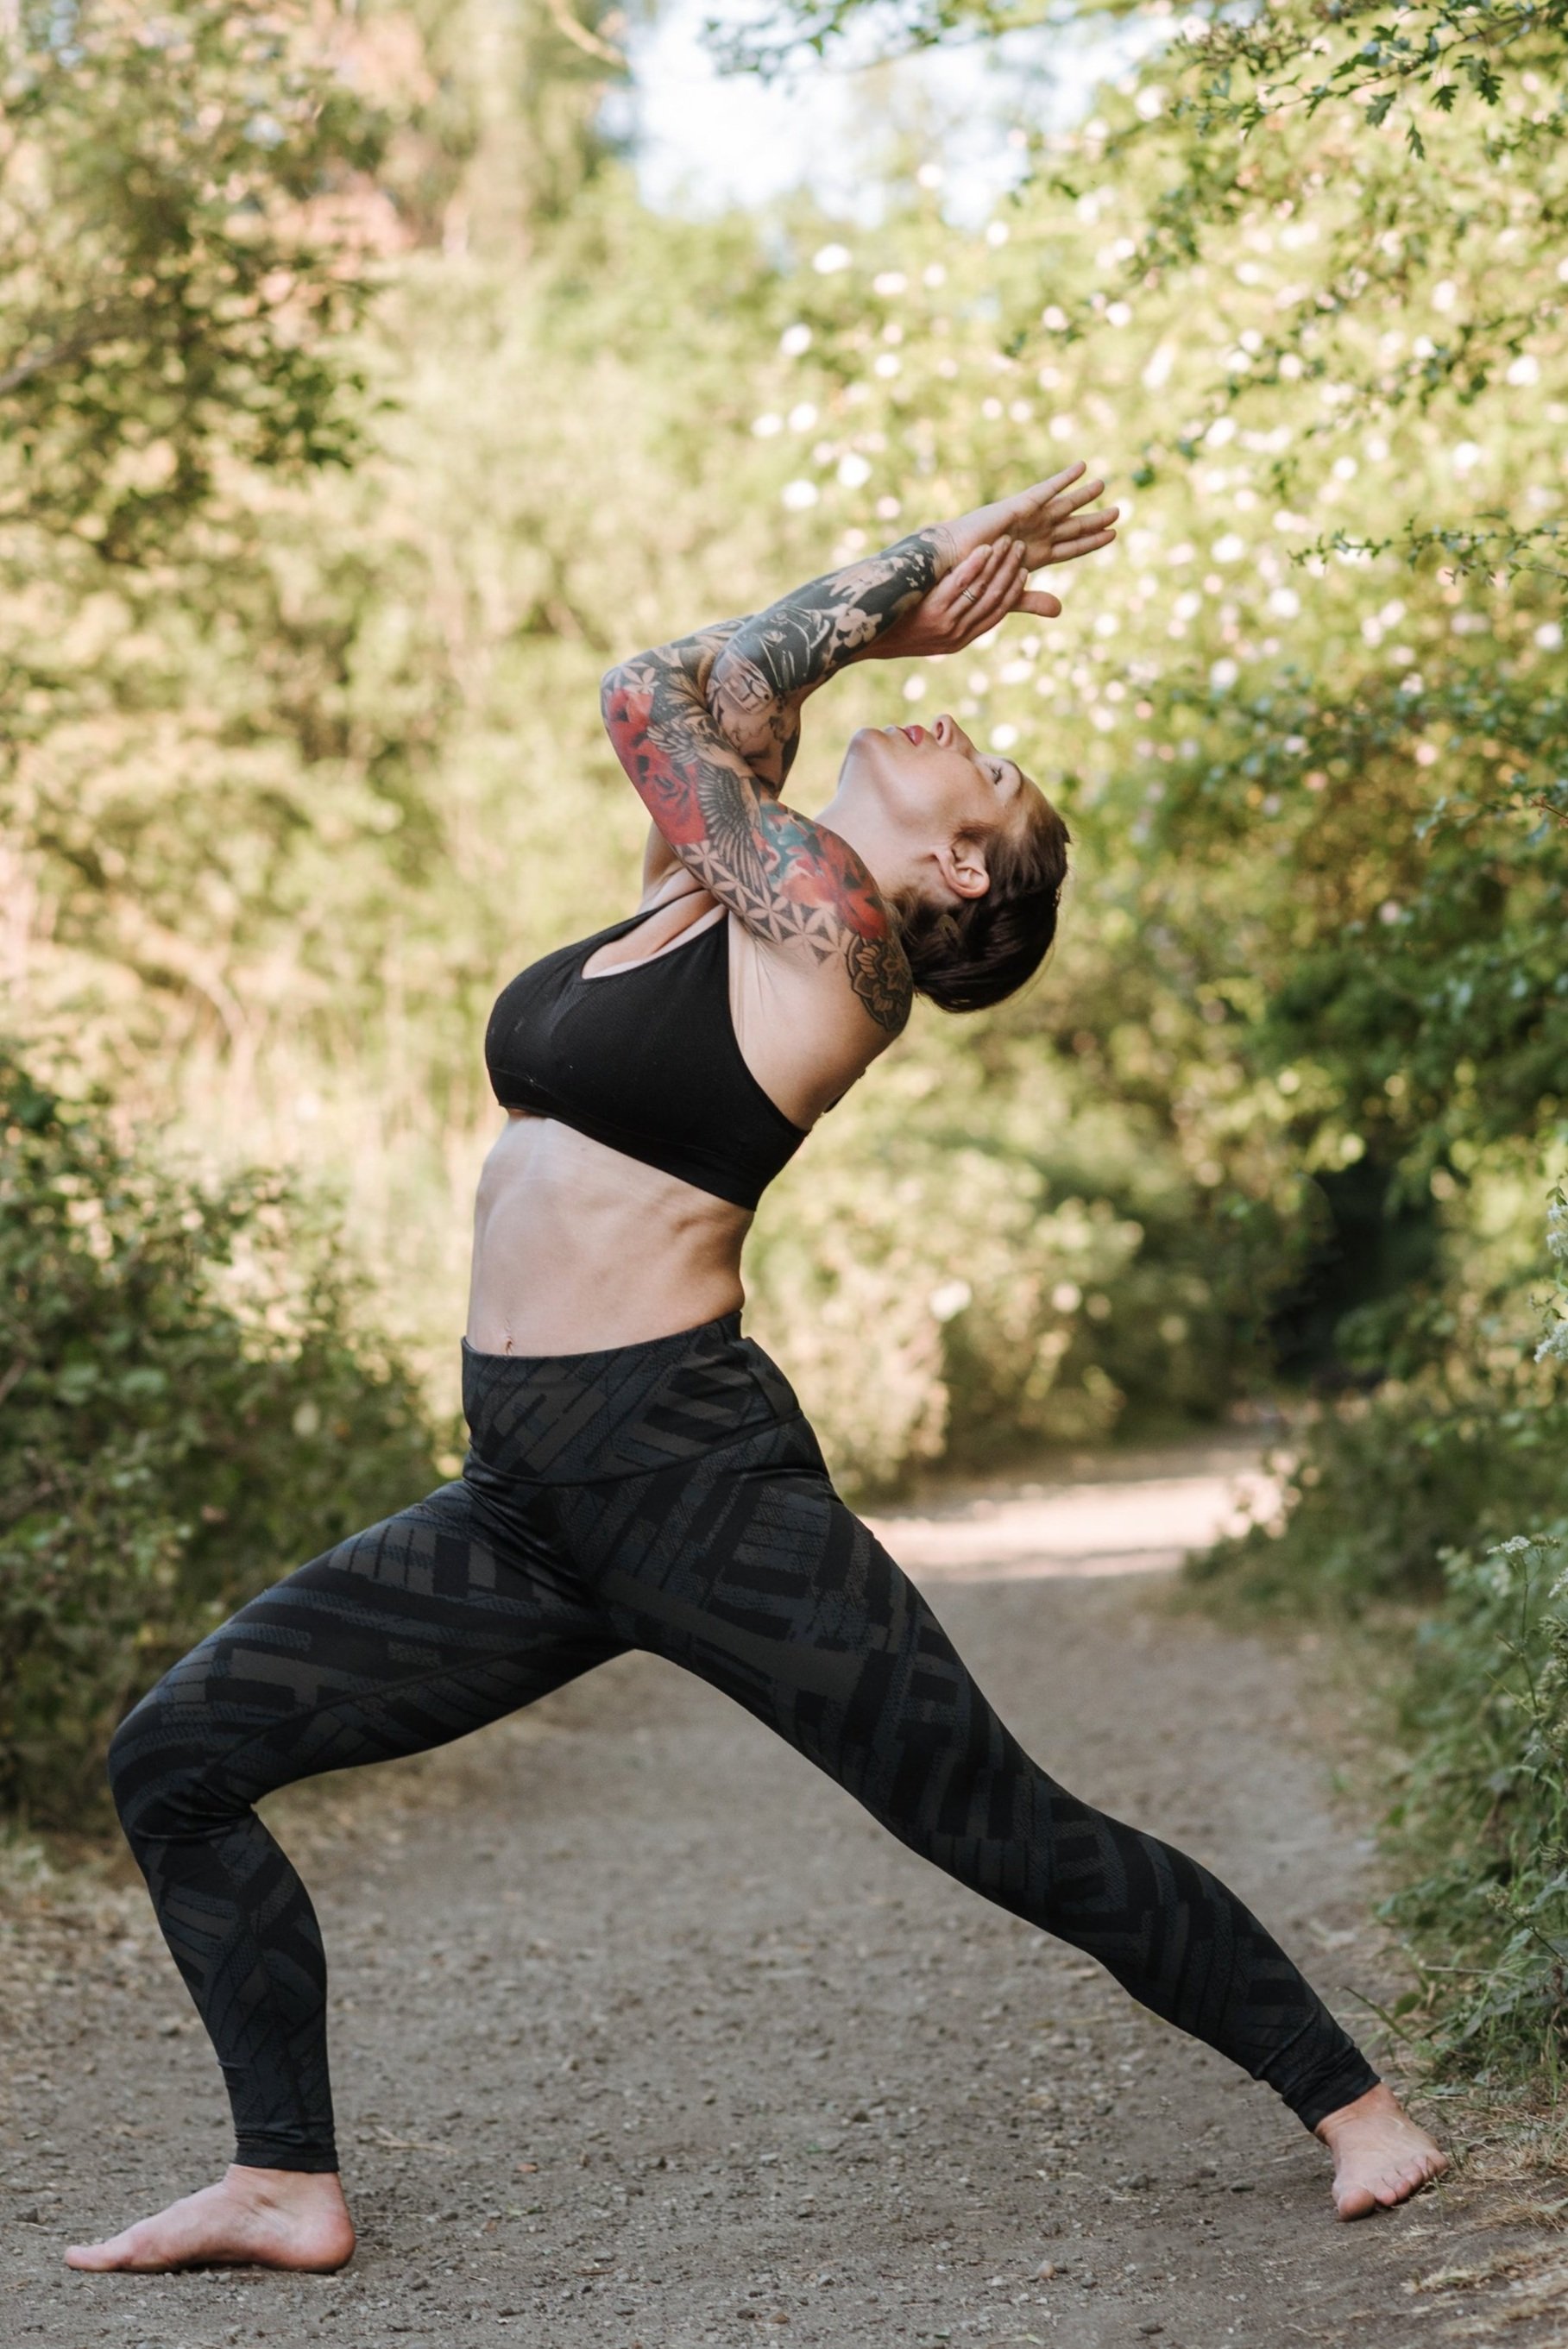 Release and Restore: 5 Yoga Poses to Melt Away Tight Shoulders